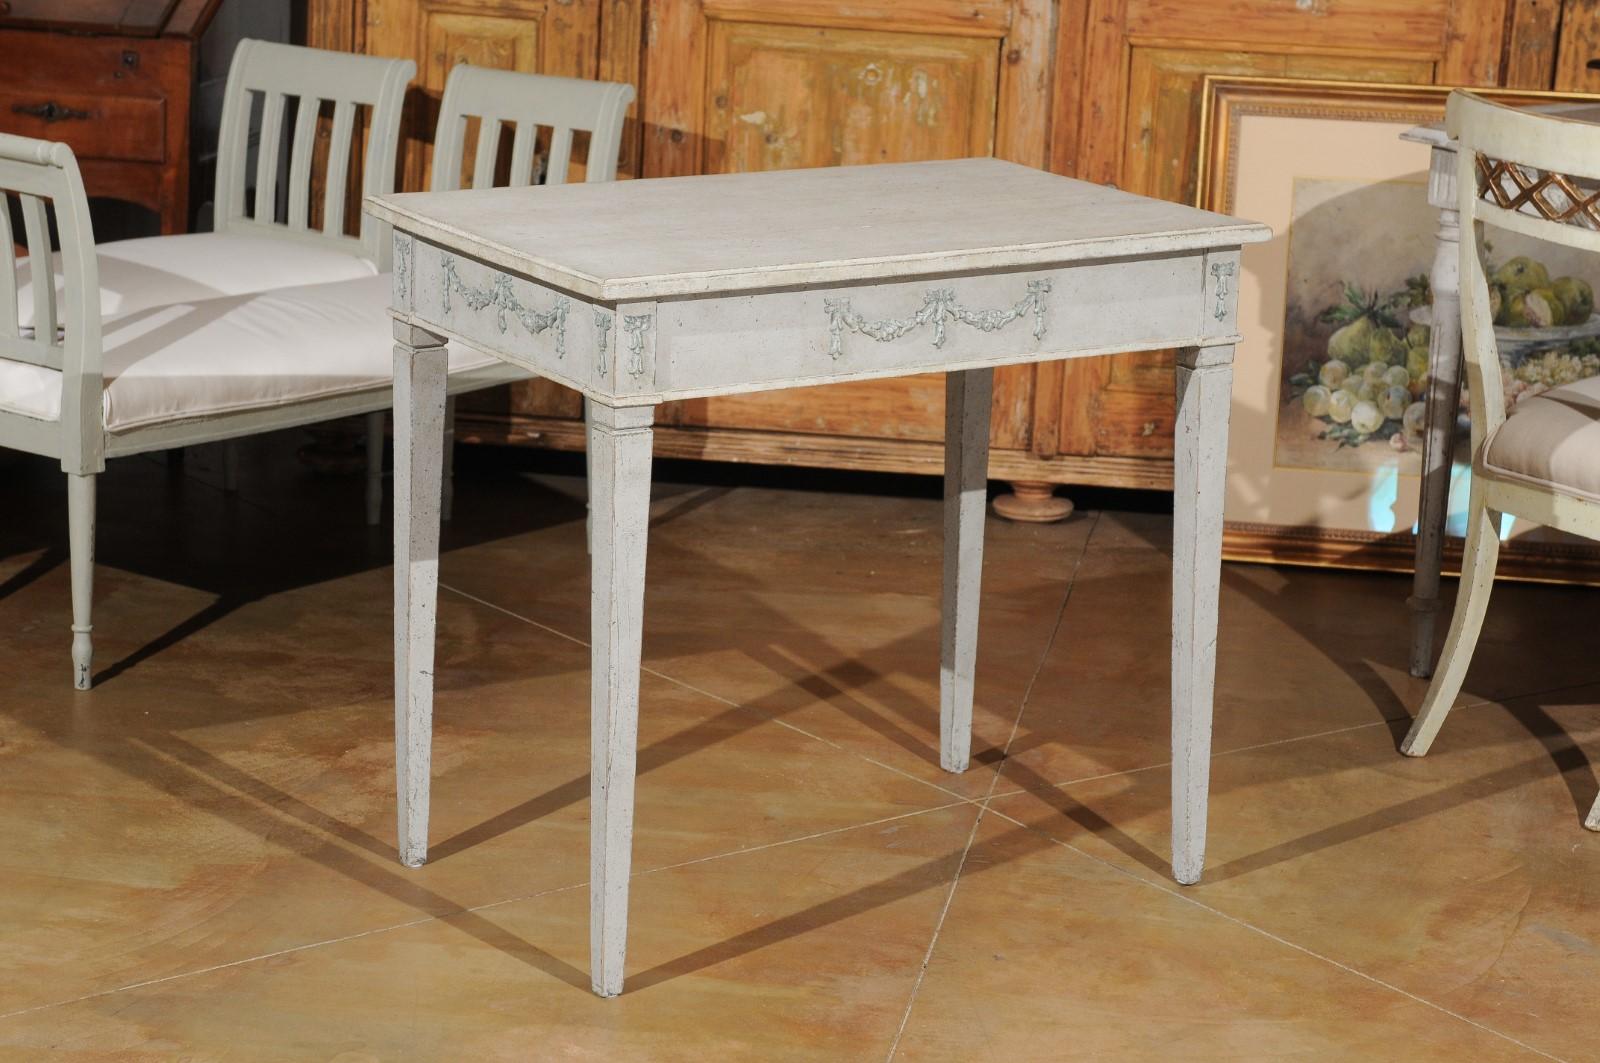 A Swedish Gustavian style painted wood table from the 19th century, with carved swags and tapered legs. Created in Sweden during the 19th century, this painted table features a rectangular top sitting above an elegant apron adorned with carved